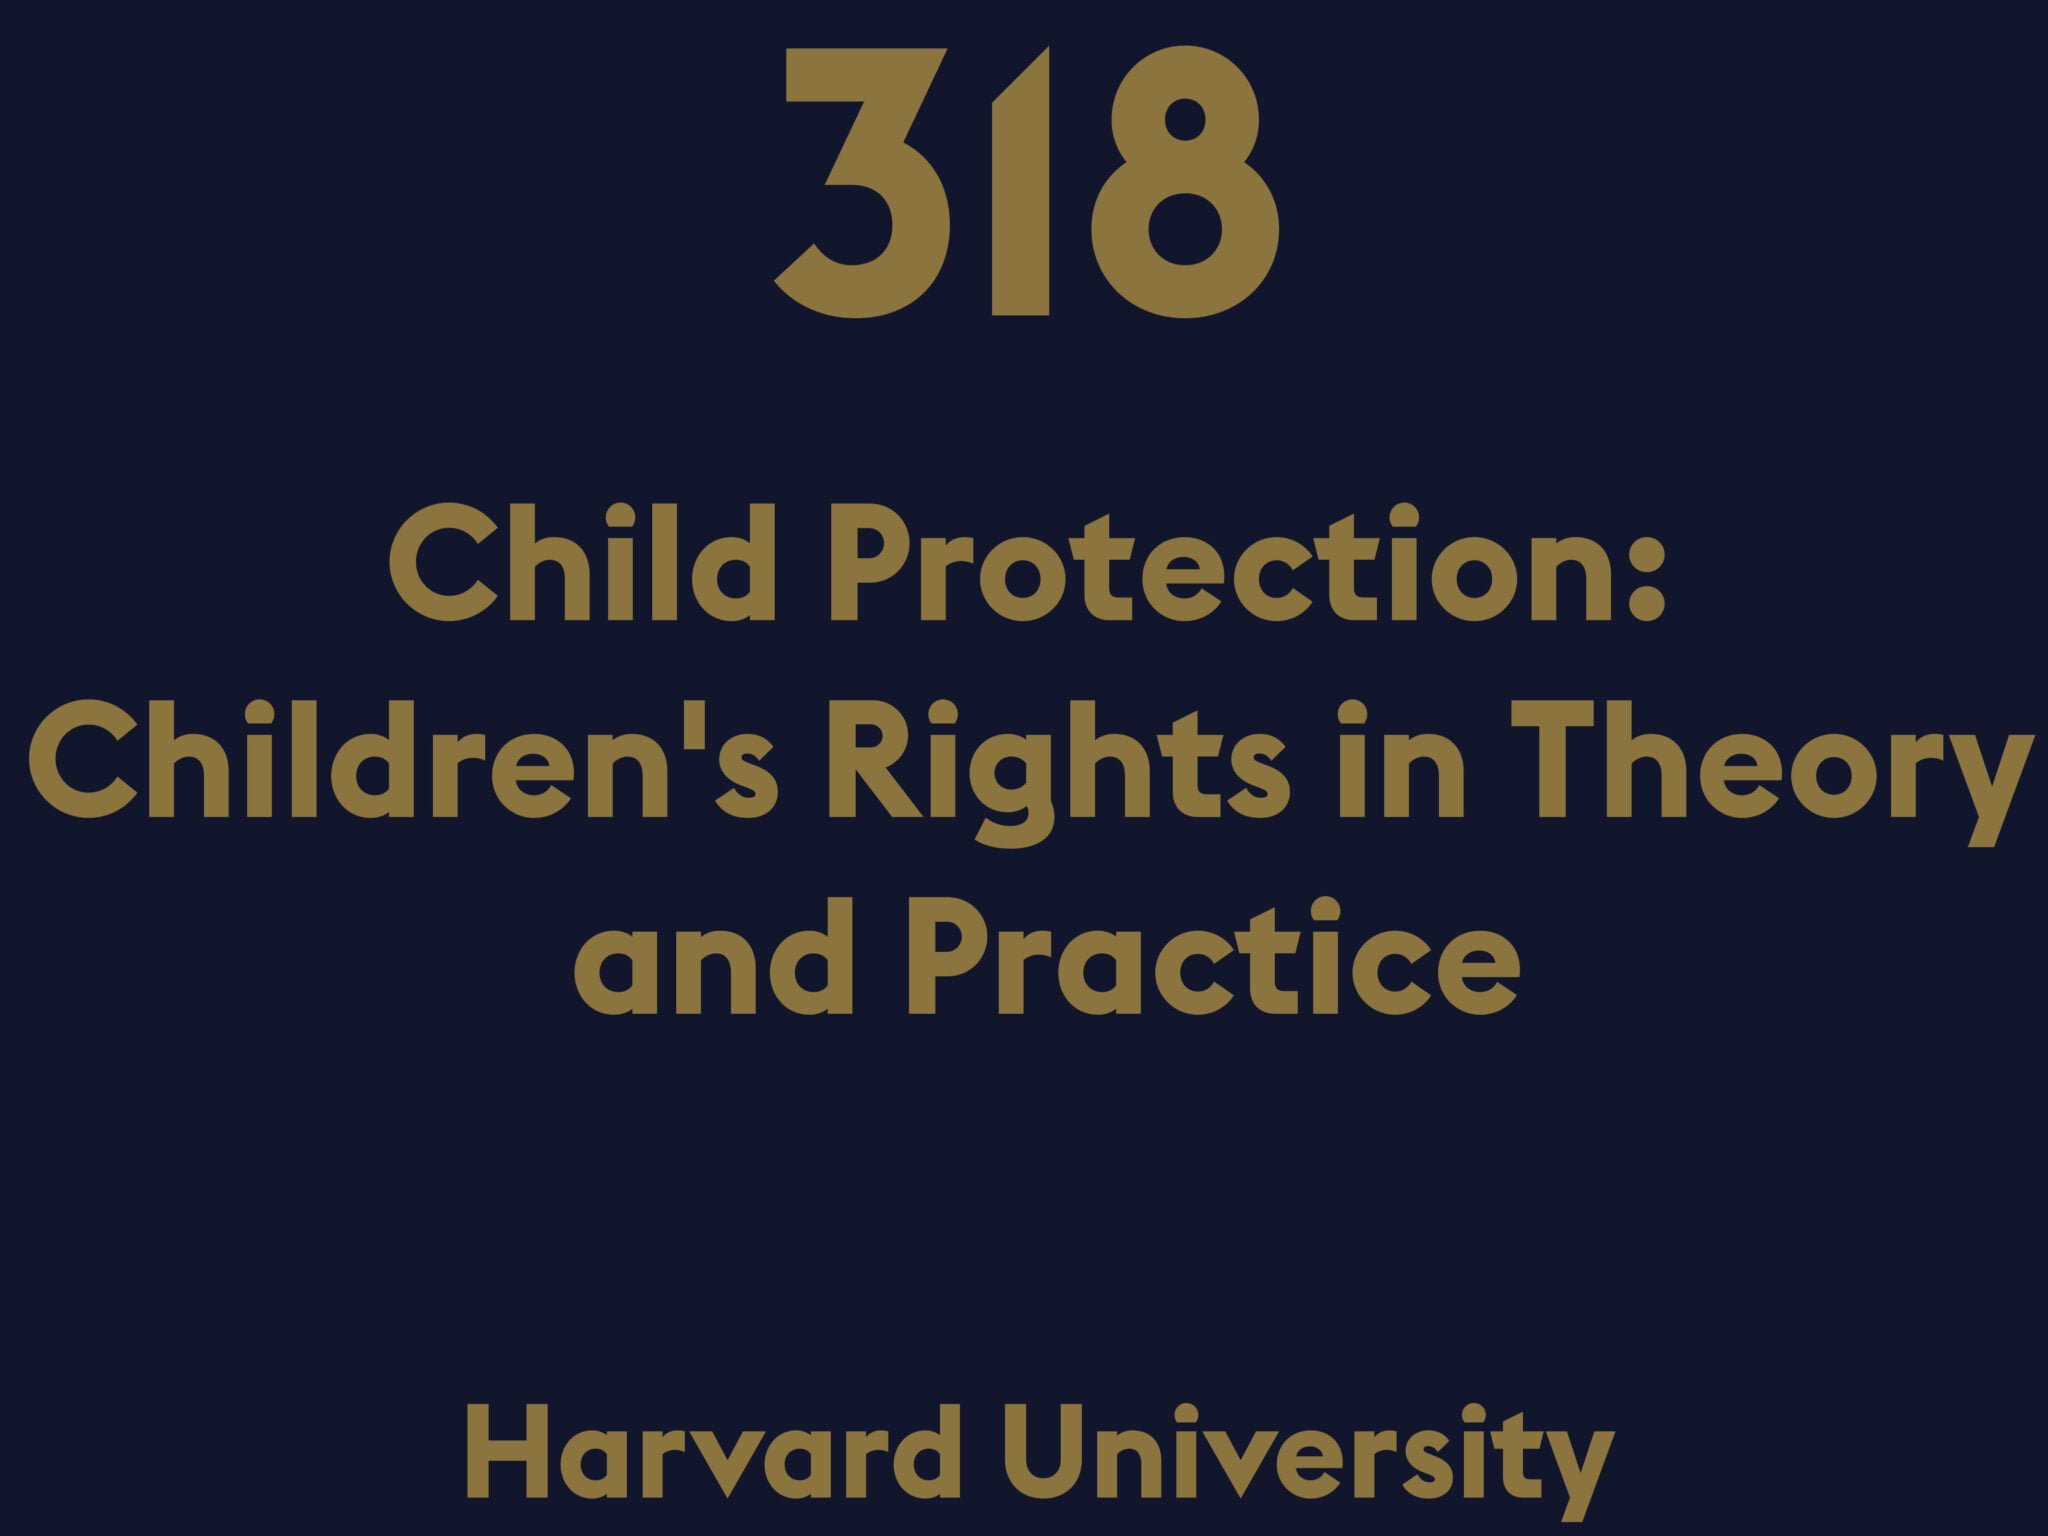 Child Protection: Children's Rights in Theory and Practice